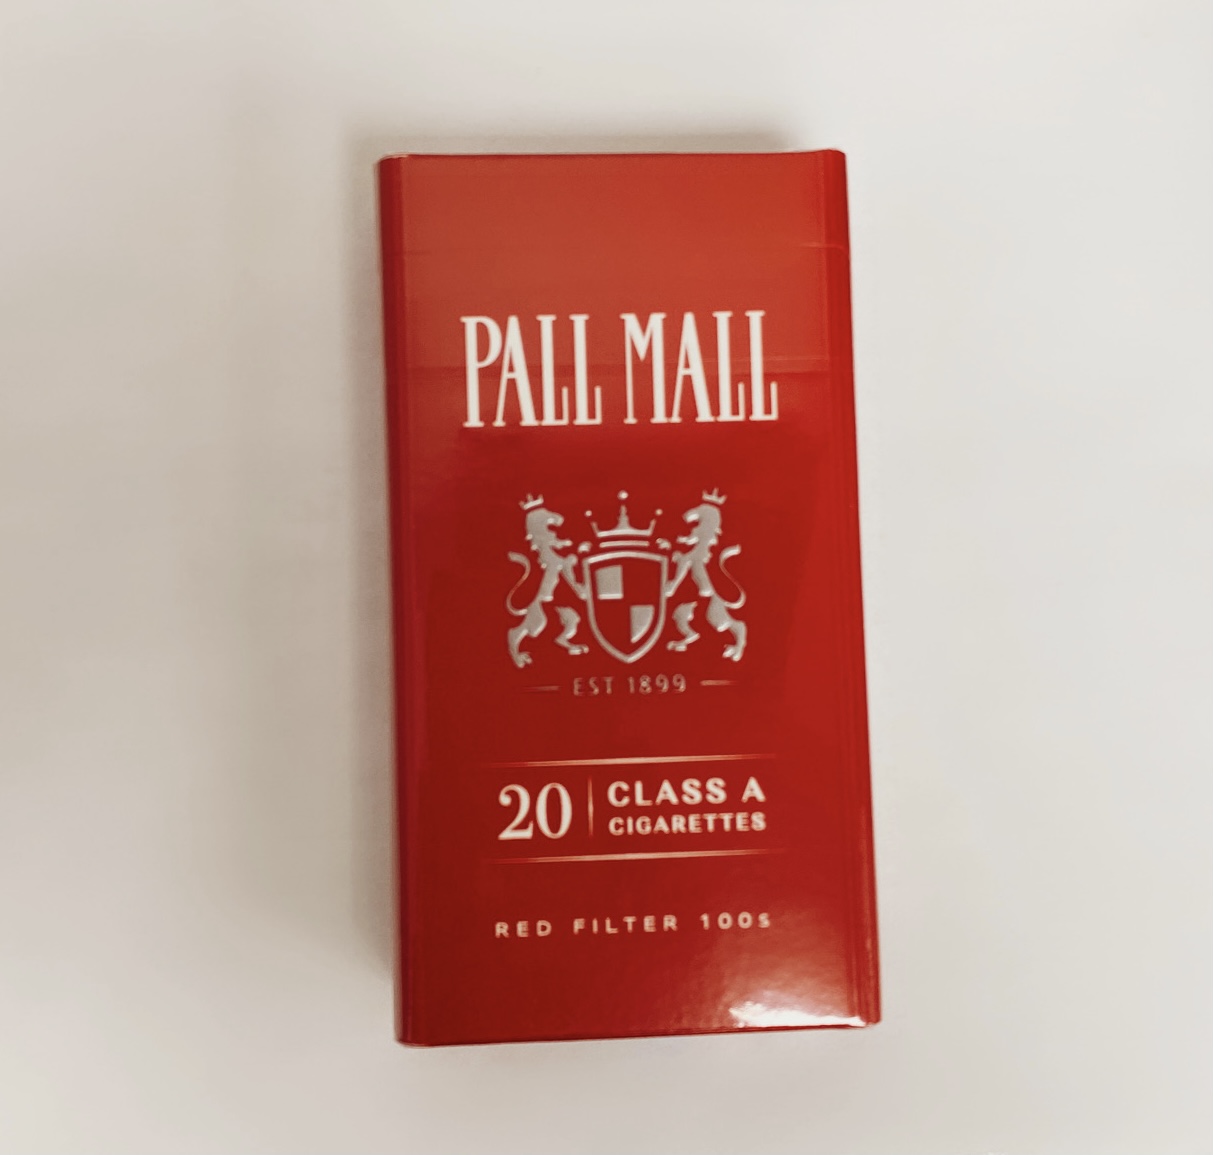 PALL MALL RED 100 - Martin & Snyder Product Sales